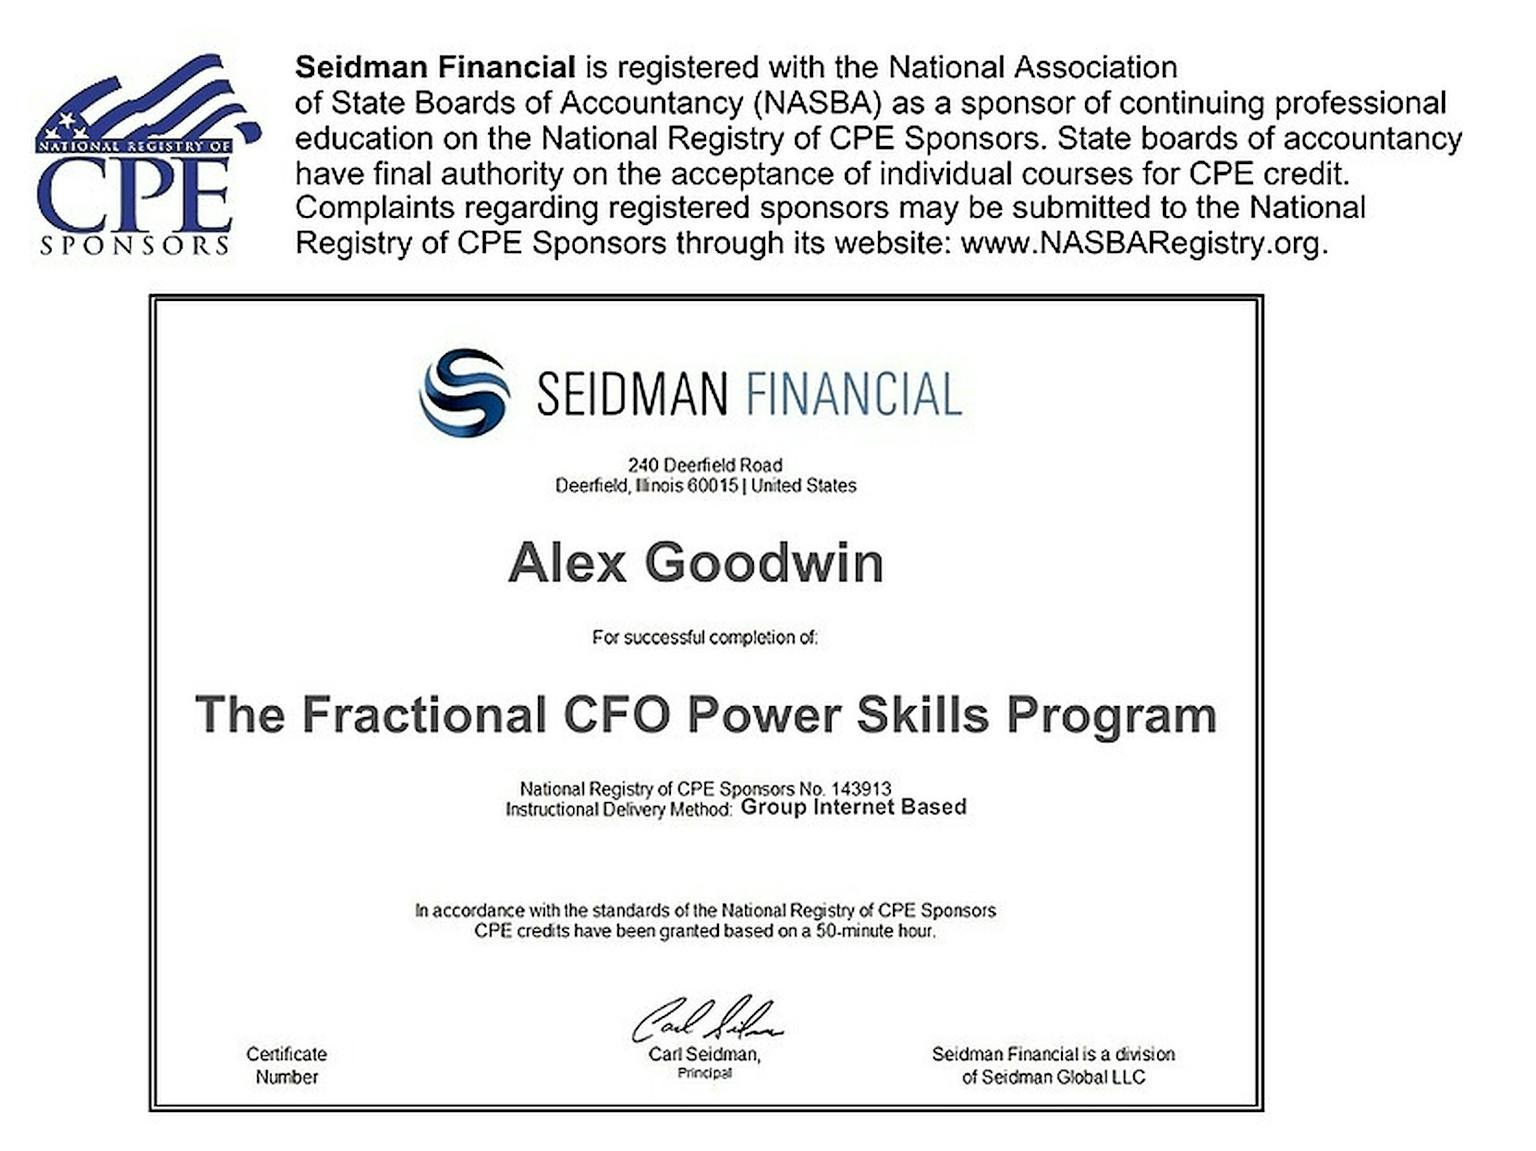 All attendees receive a Seidman Financial certificate of completion qualifying for 16.0 hours of CPE